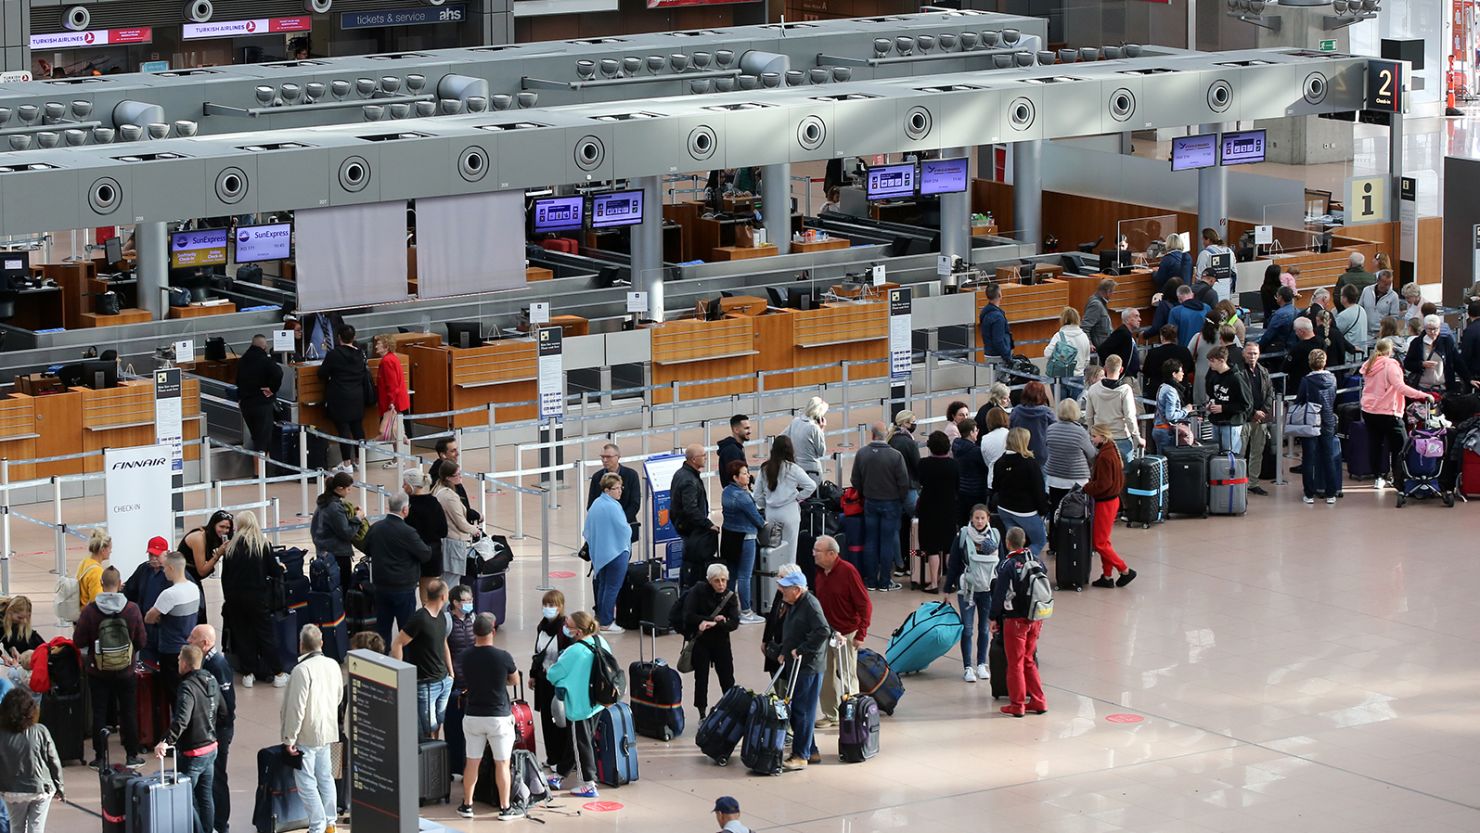 Passengers stand in line as delays and cancellations hit Hamburg Airport.